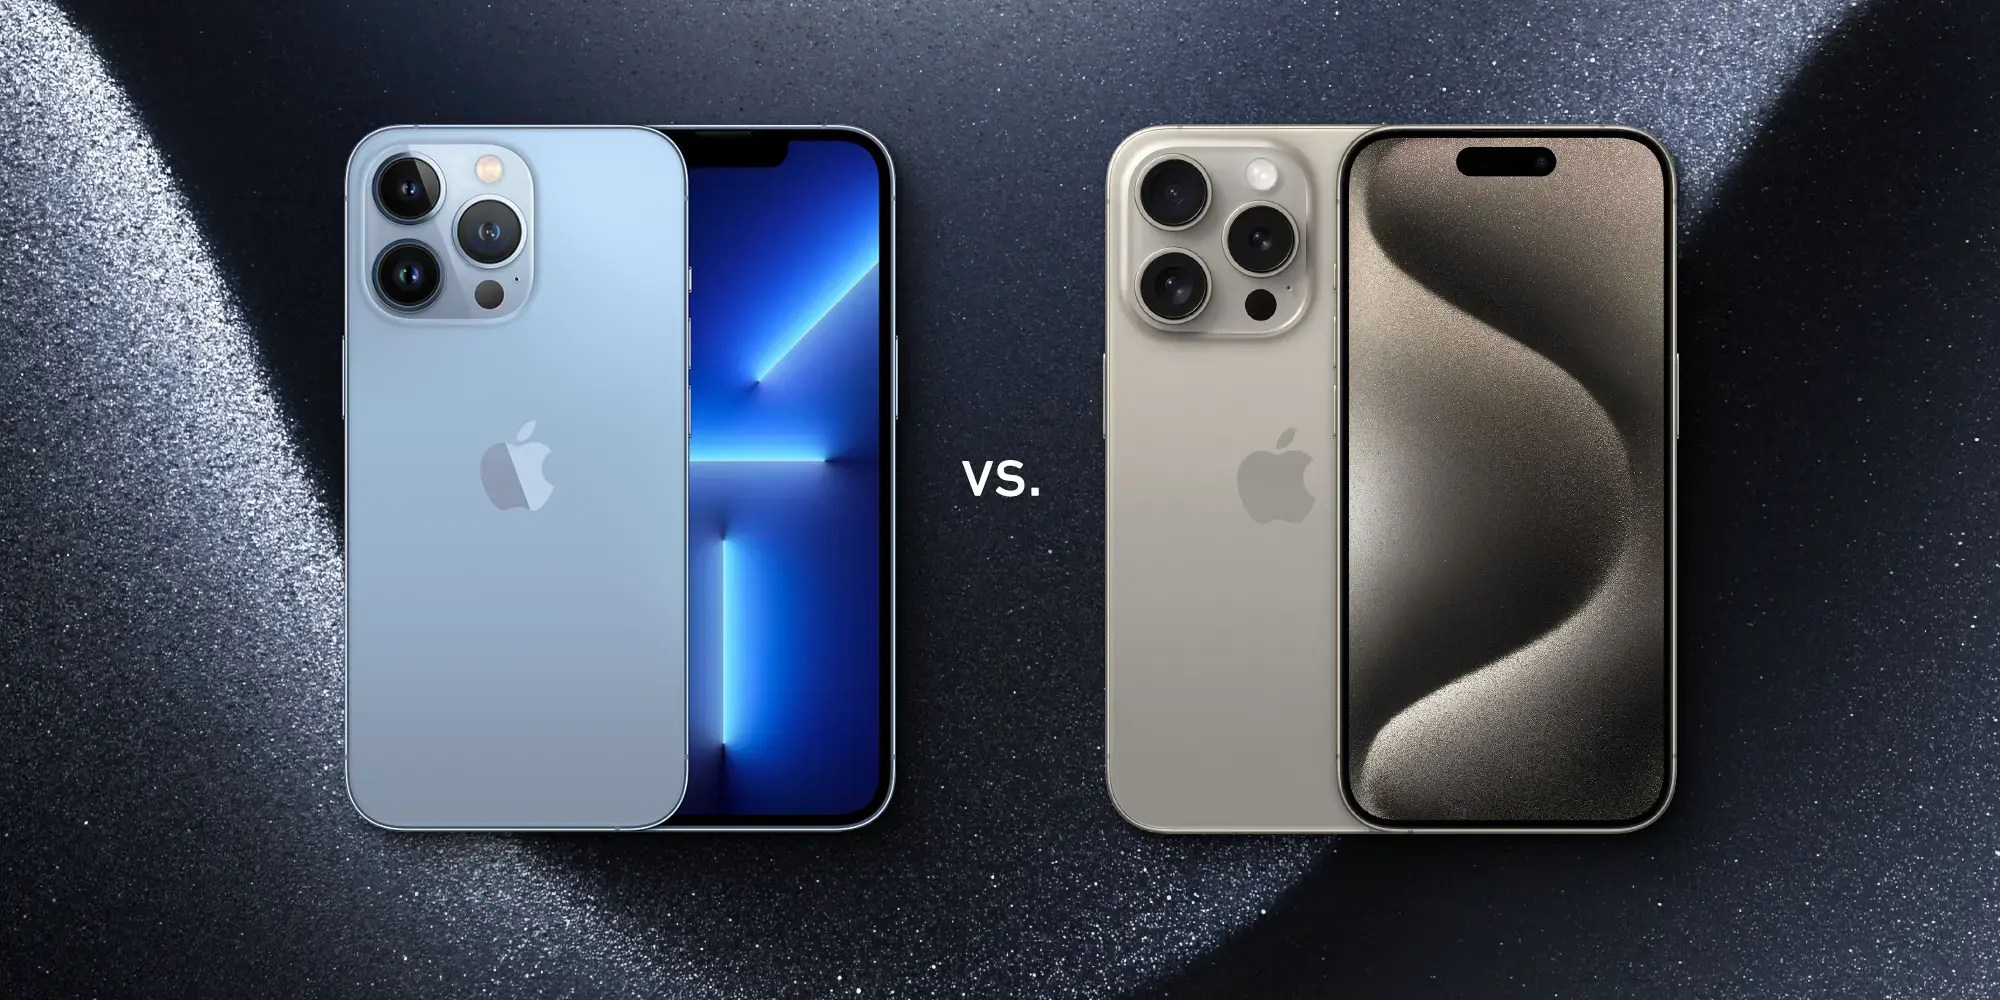 iPhone 15 Pro Max vs iPhone 13 Pro Max: What's new?